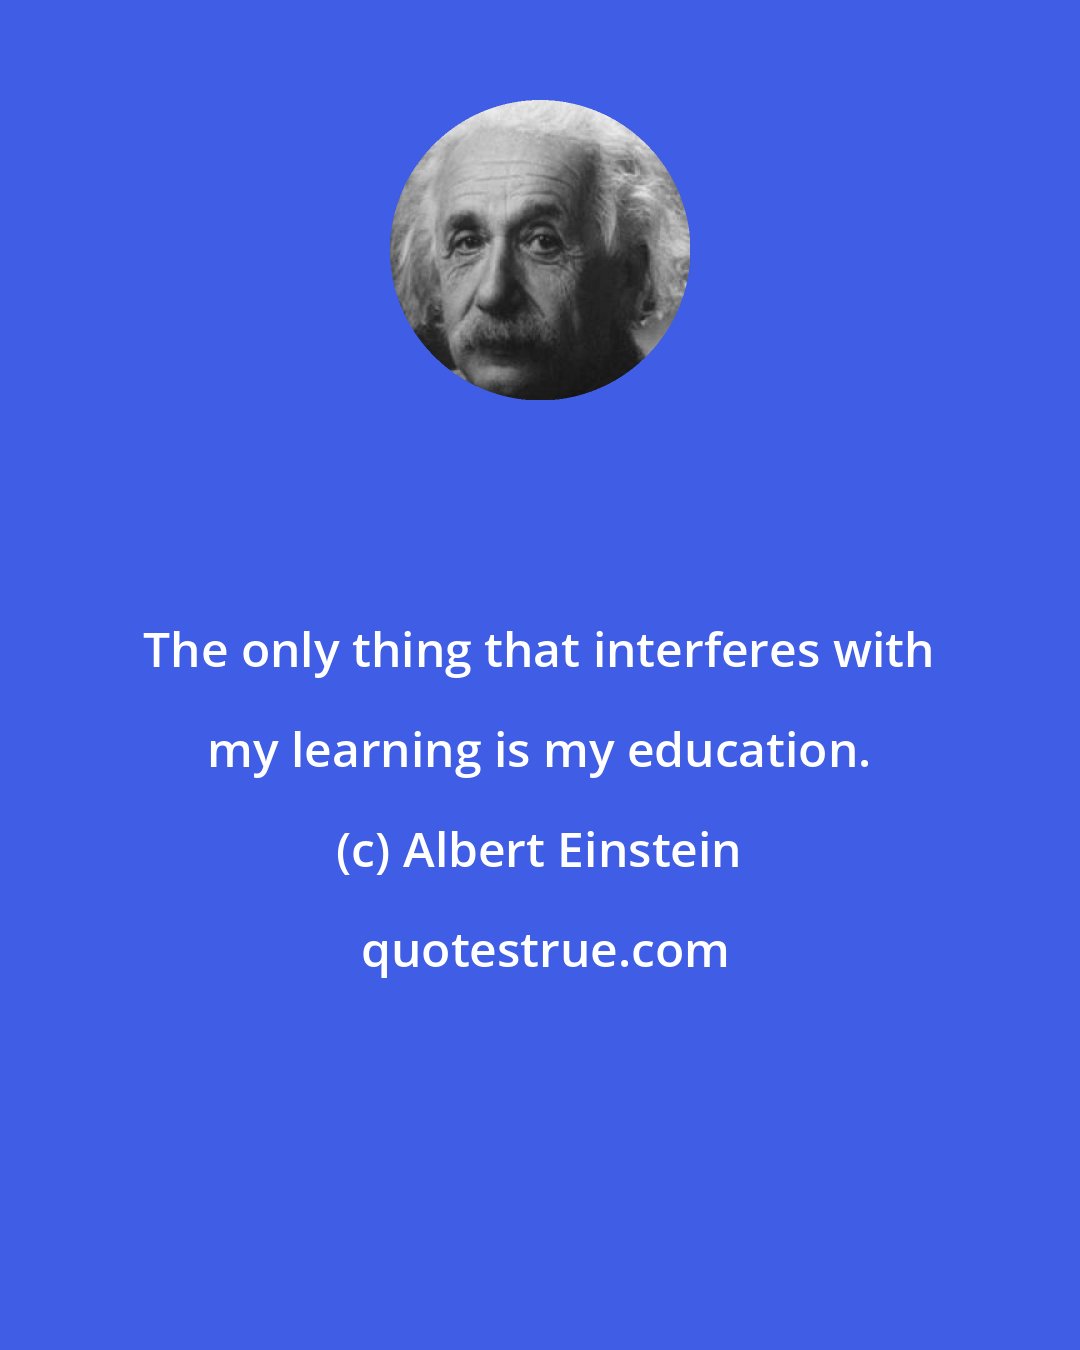 Albert Einstein: The only thing that interferes with my learning is my education.